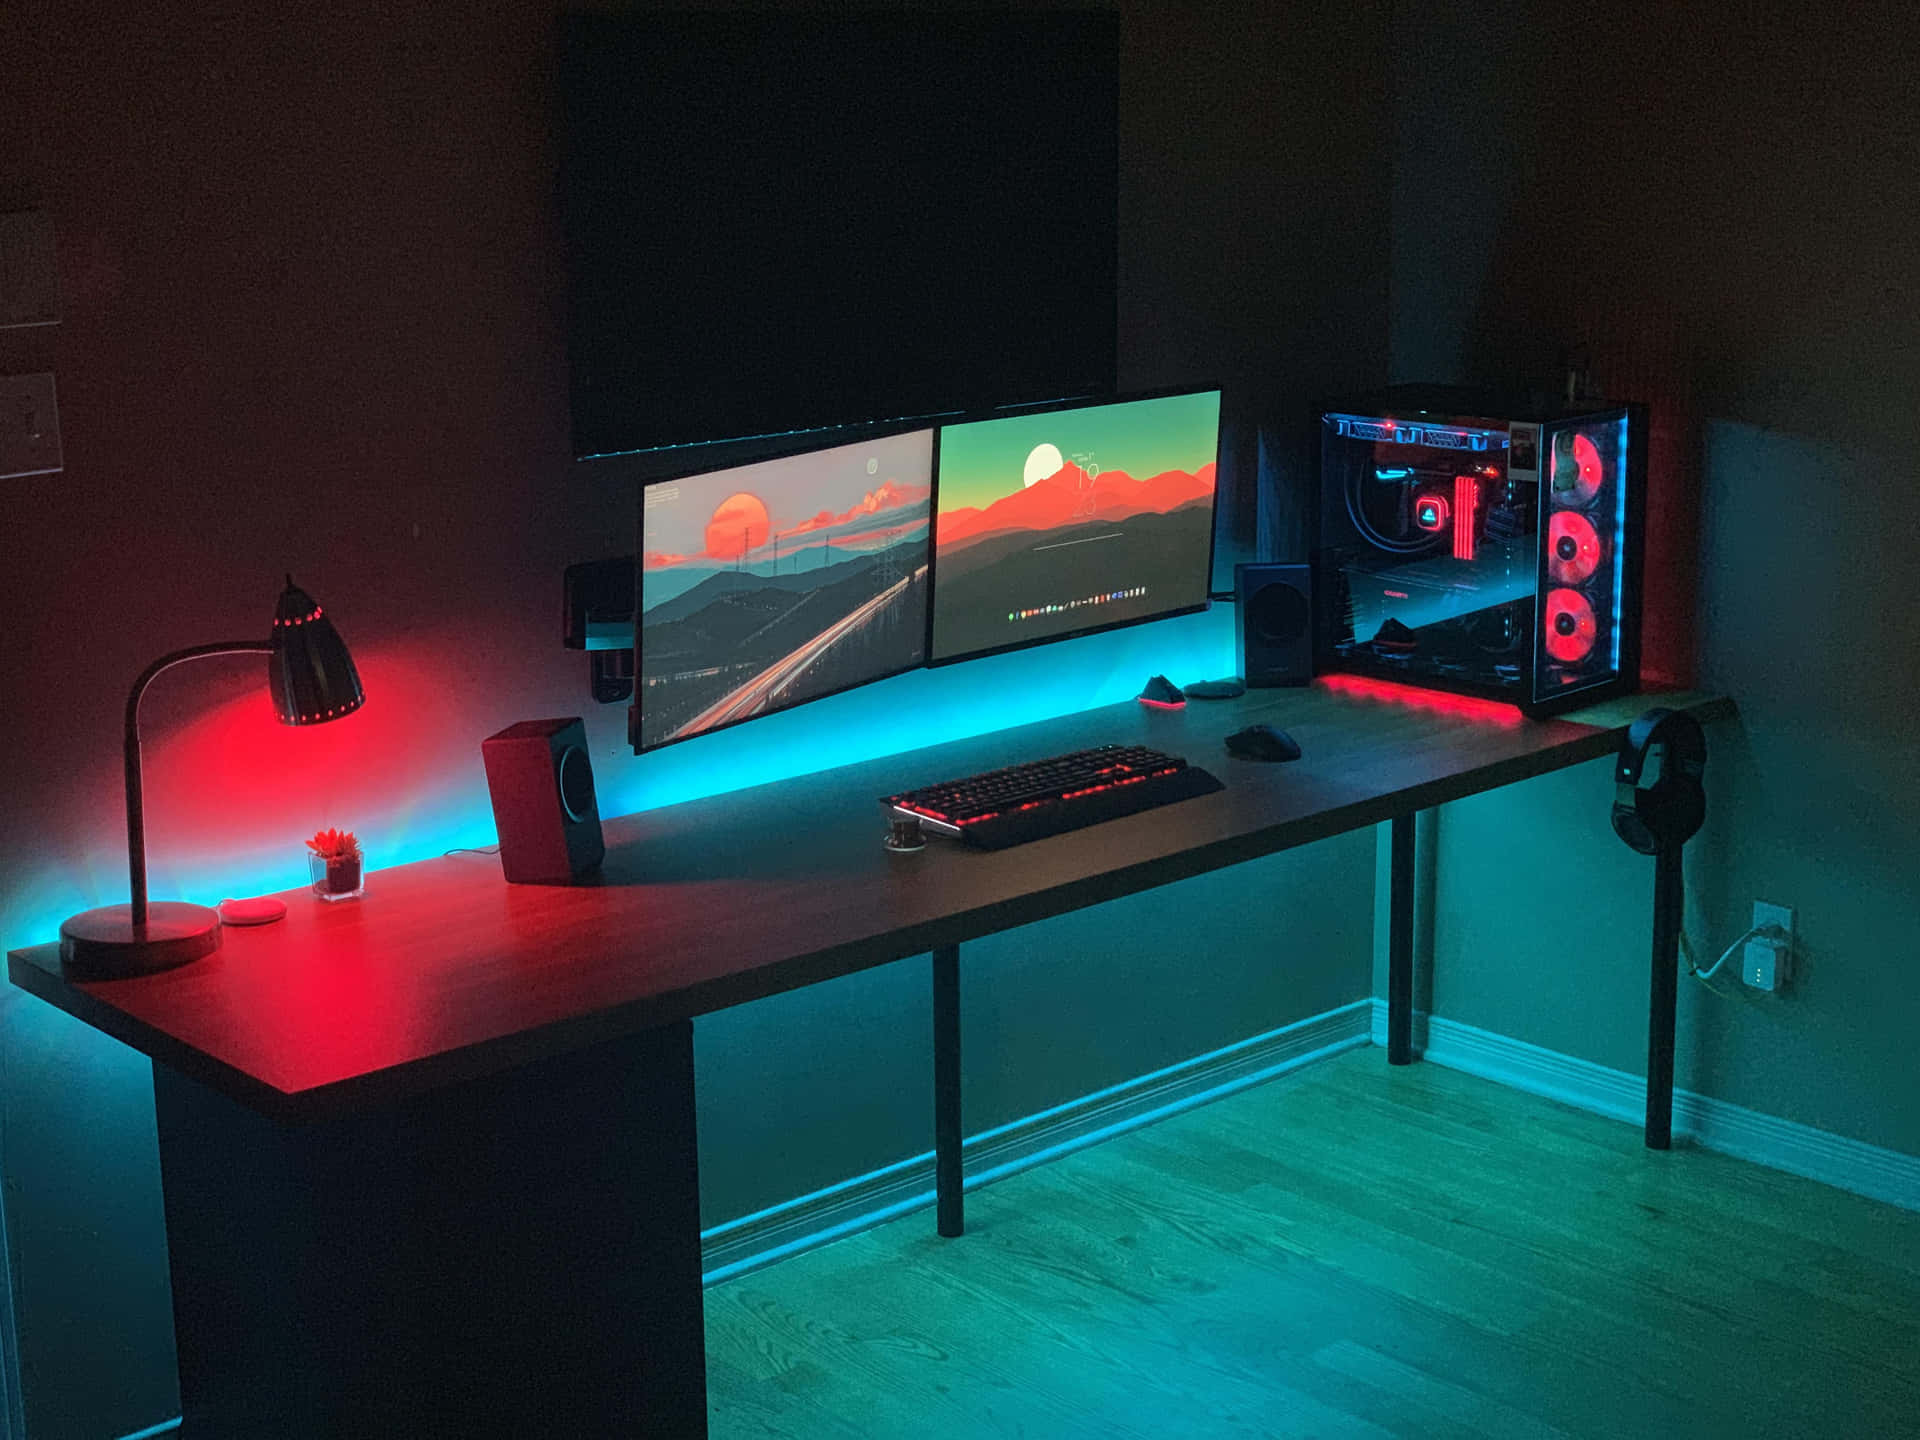 Upgrade your gaming experience with this sleek PC setup Wallpaper